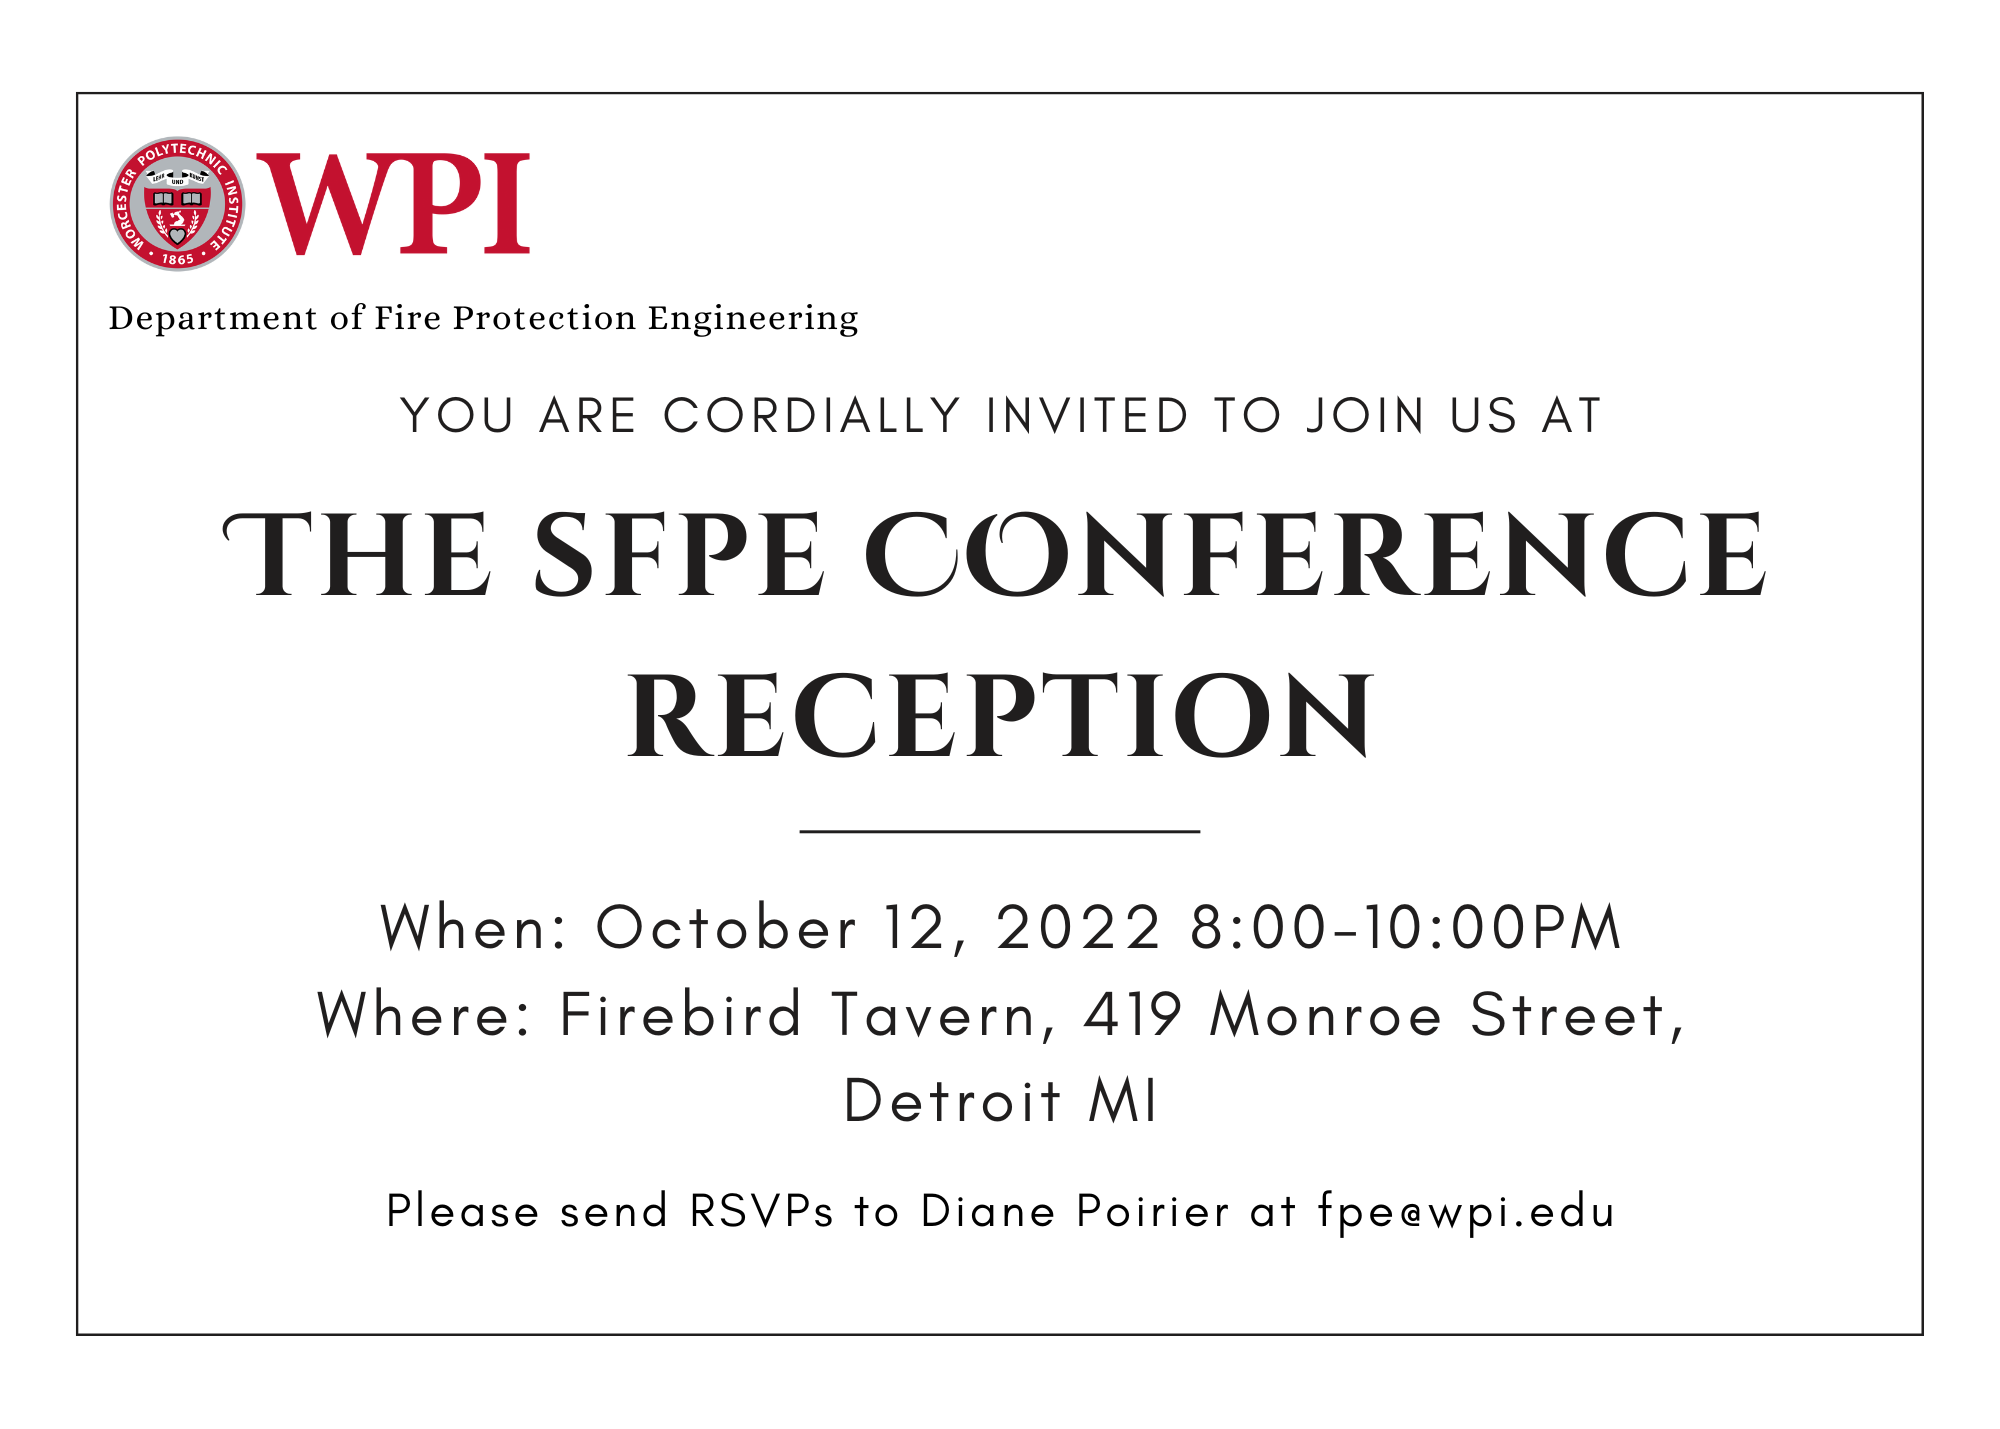 you are cordially invited to join us at The SFPE Conference Reception When: October 12, 2022 8:00-10:00PM Where: Firebird Tavern, 419 Monroe Street, Detroit MI. Please send RSVPs to Diane Poirier at fpe@wpi.edu